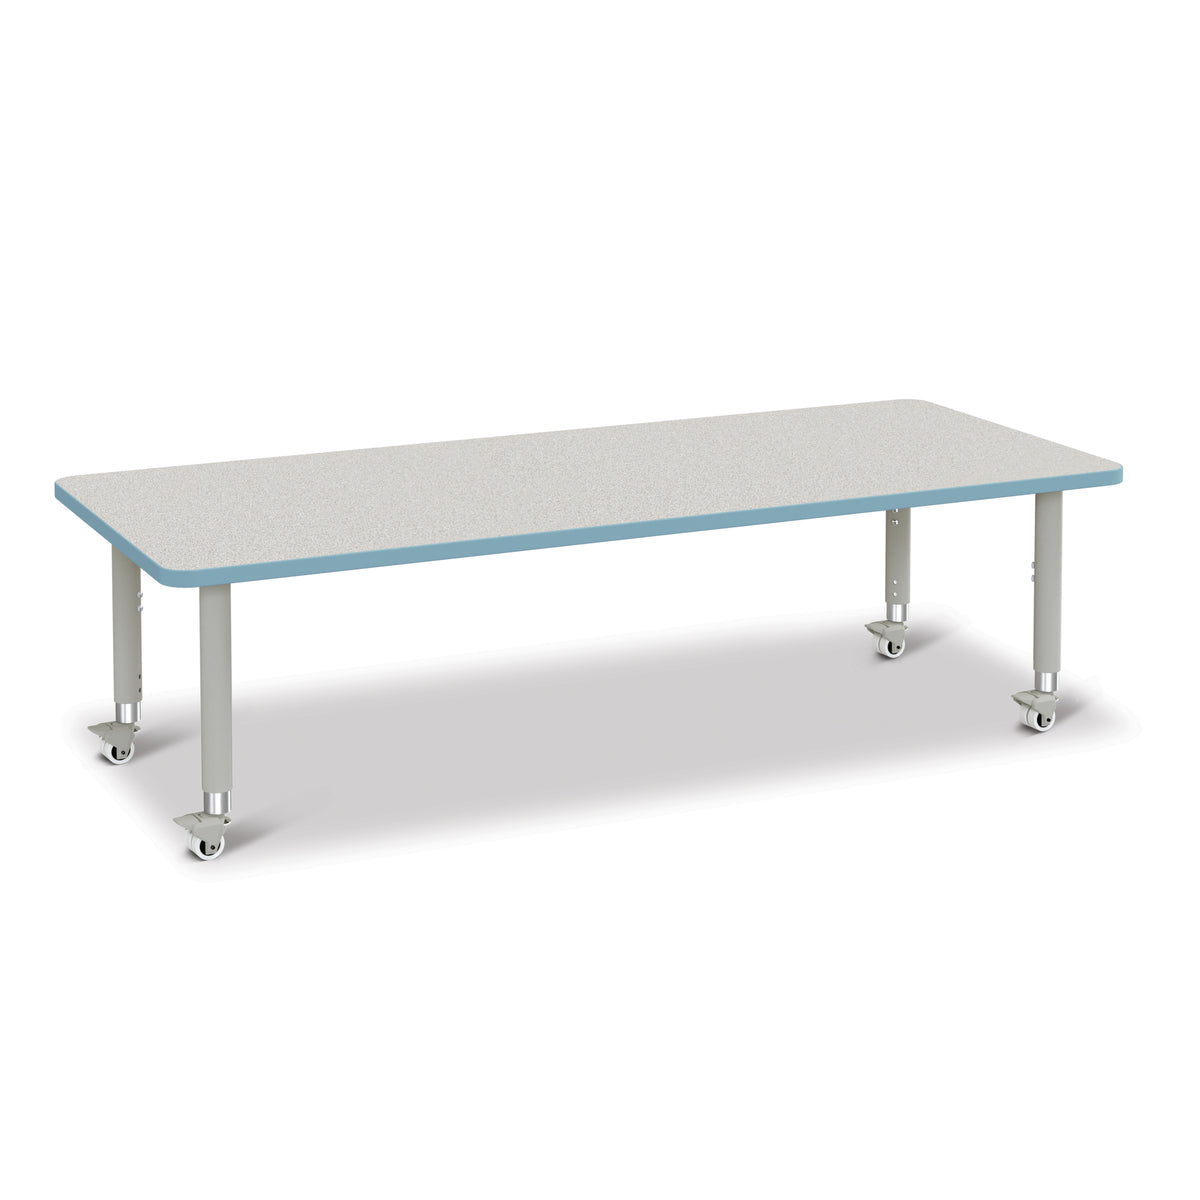 6413JCM131, Berries Rectangle Activity Table - 30" X 72", Mobile - Freckled Gray/Coastal Blue/Gray